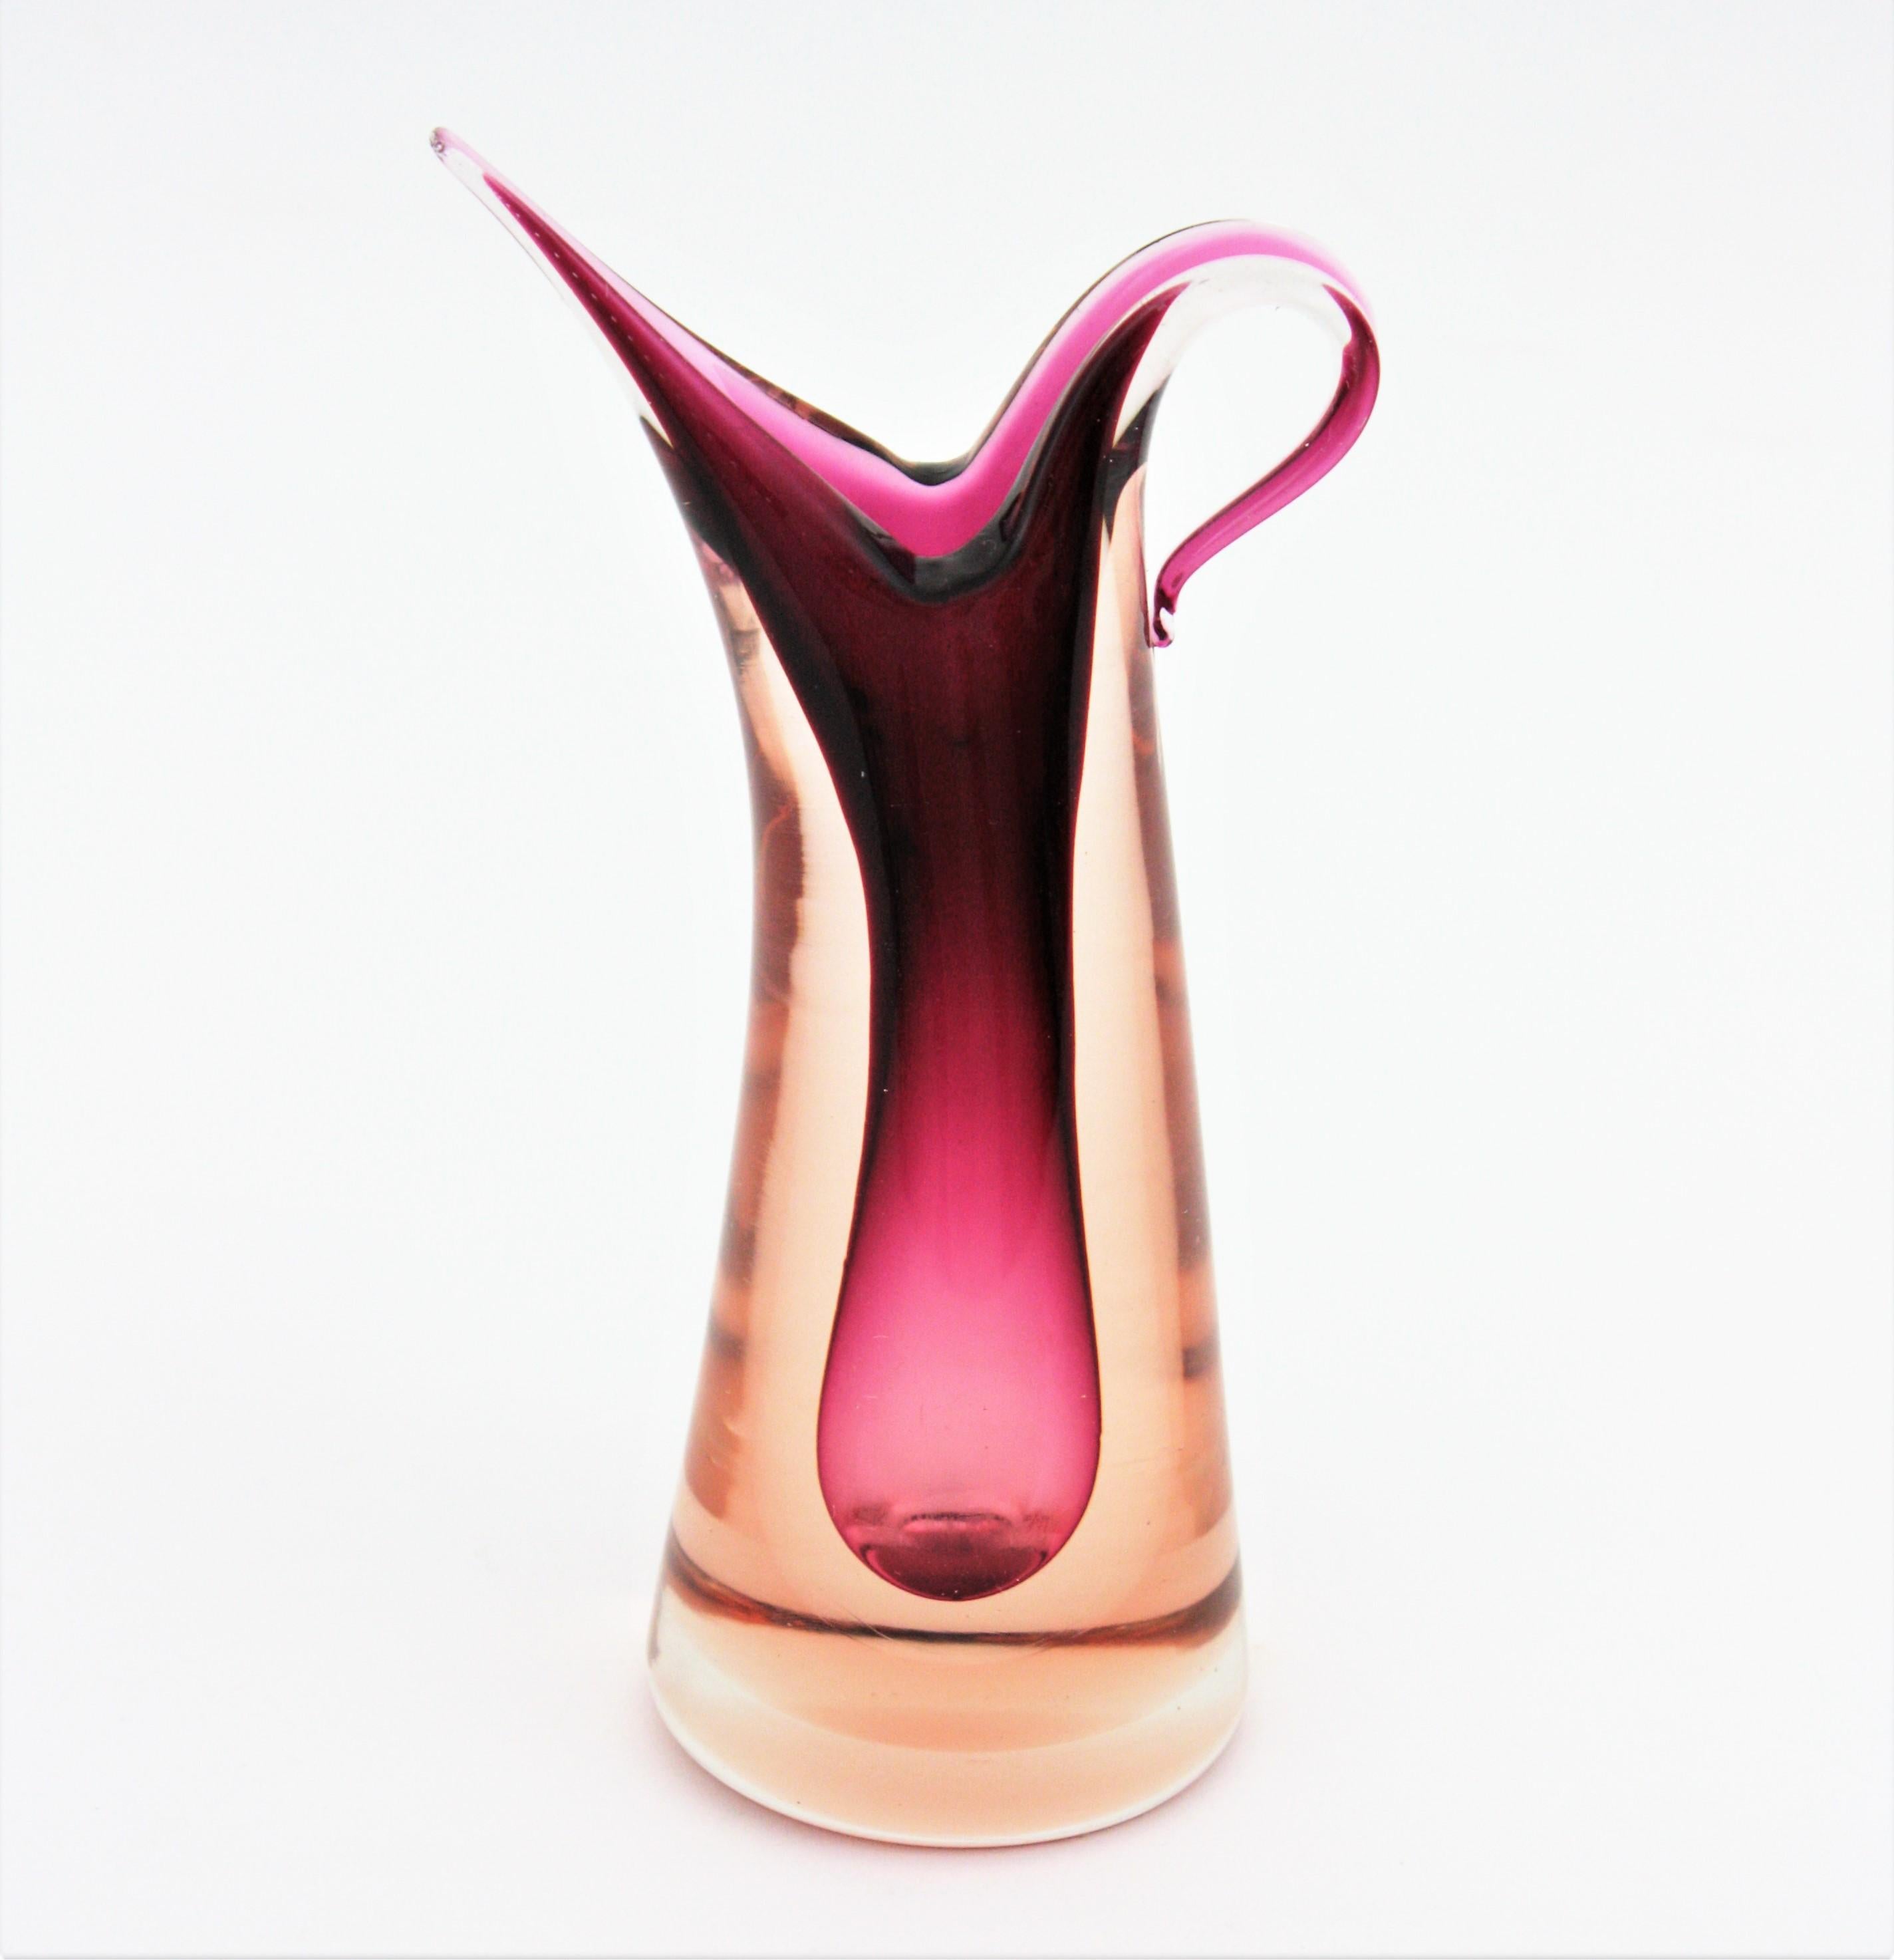 Sommerso Murano Jug Shaped Vase in shades of Pink and Garnet. Designed by Flavio Poli and manufactured by Seguso Vetri d'Arte. Italy, 1950s.
Amazing jug shape and eye-catching colors.
Lovely to be used as flower vase or decorative vase. To be